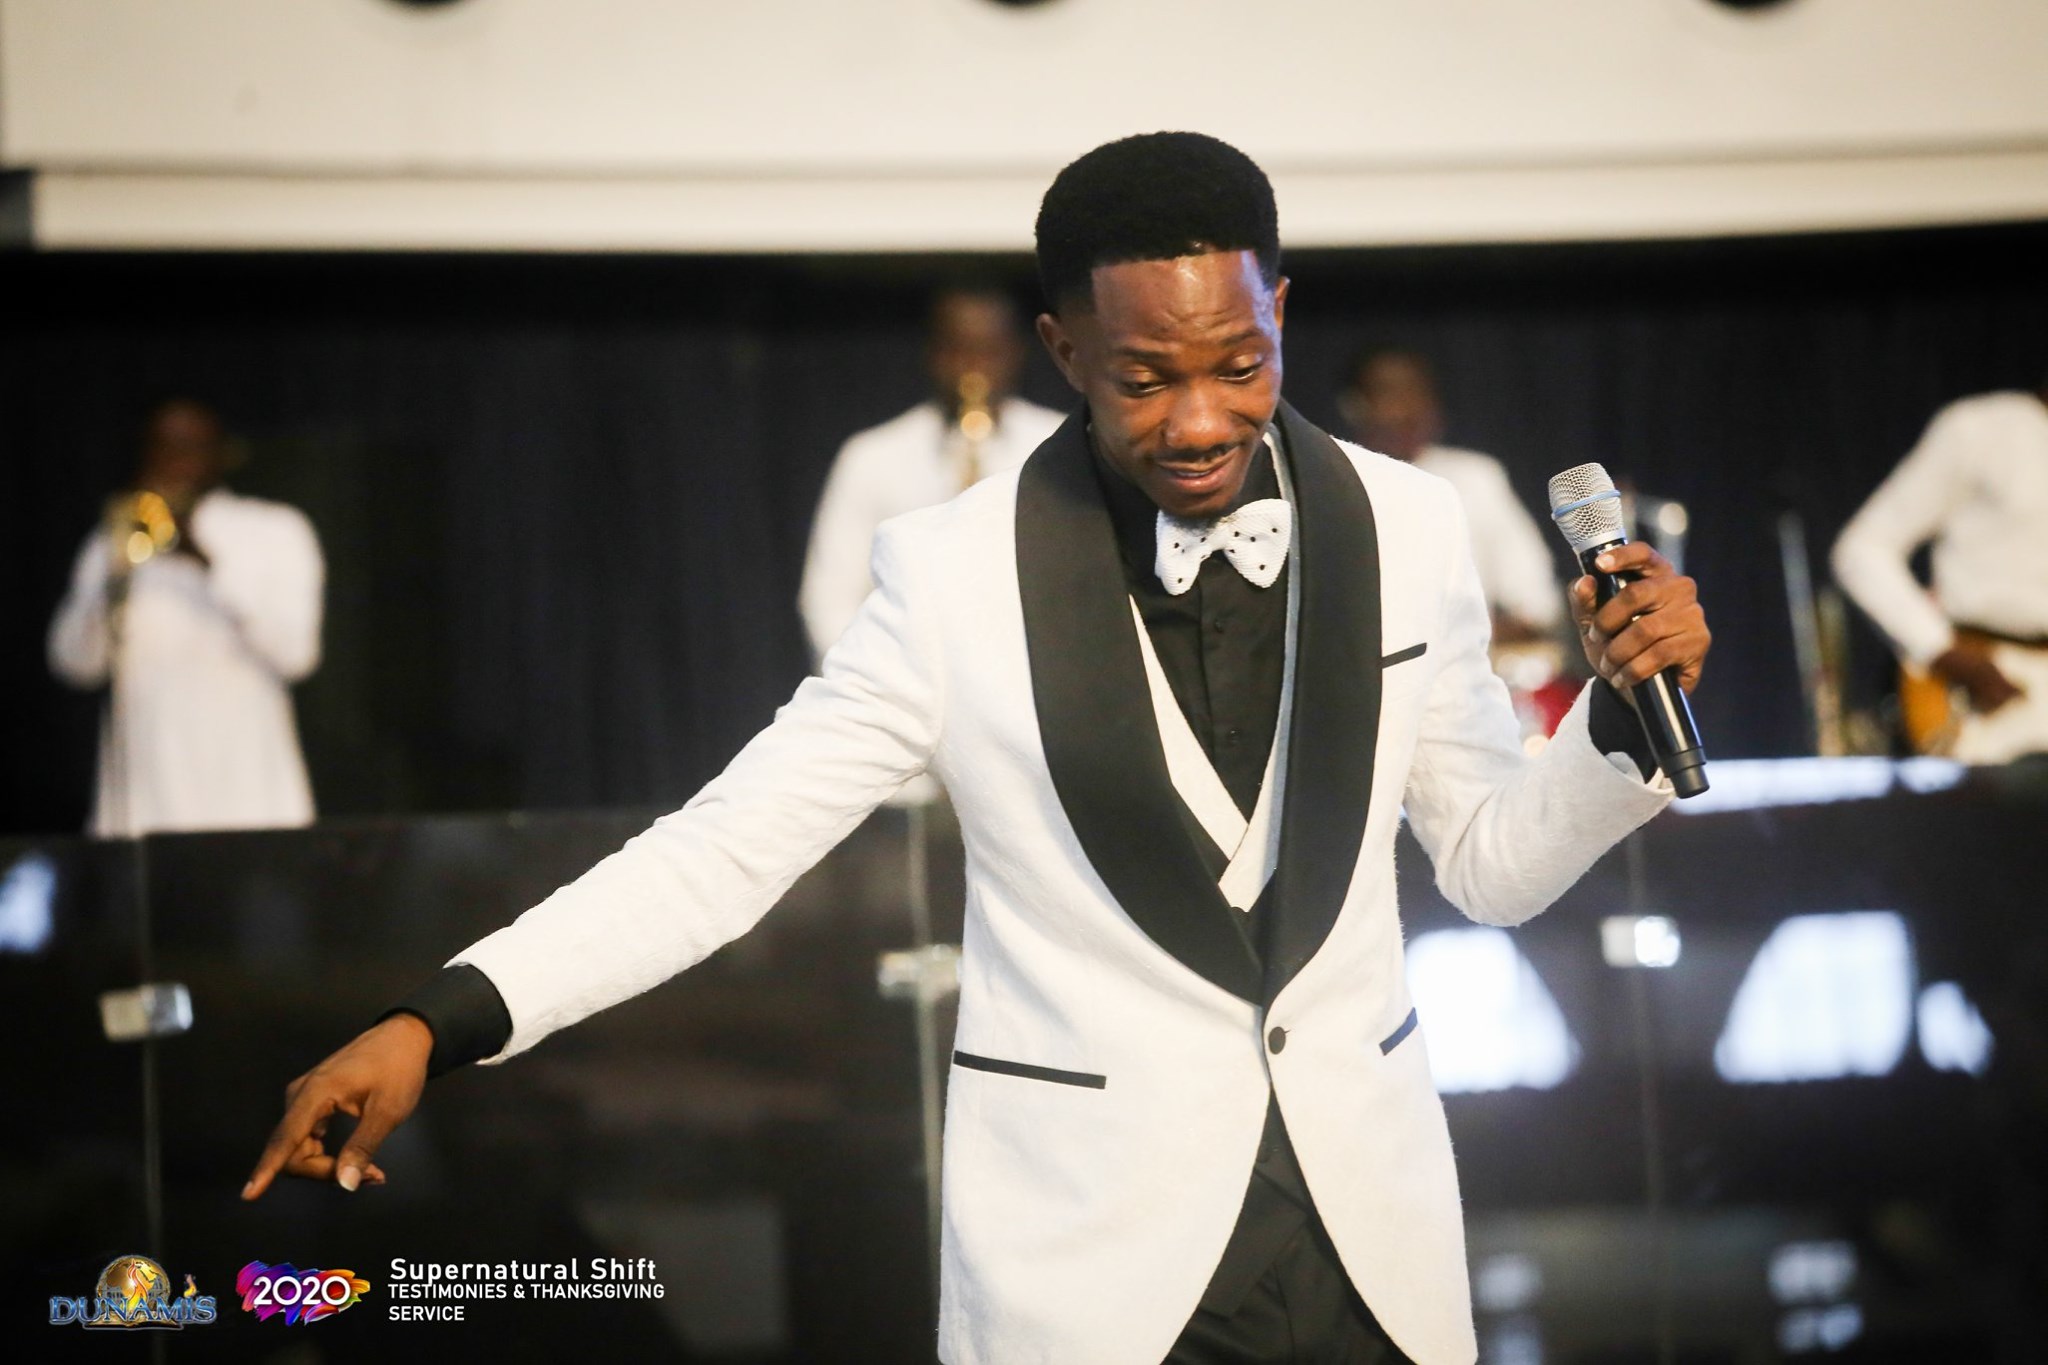 Testimonies and Thanksgiving High Praise by Dunamis Voice Int'l